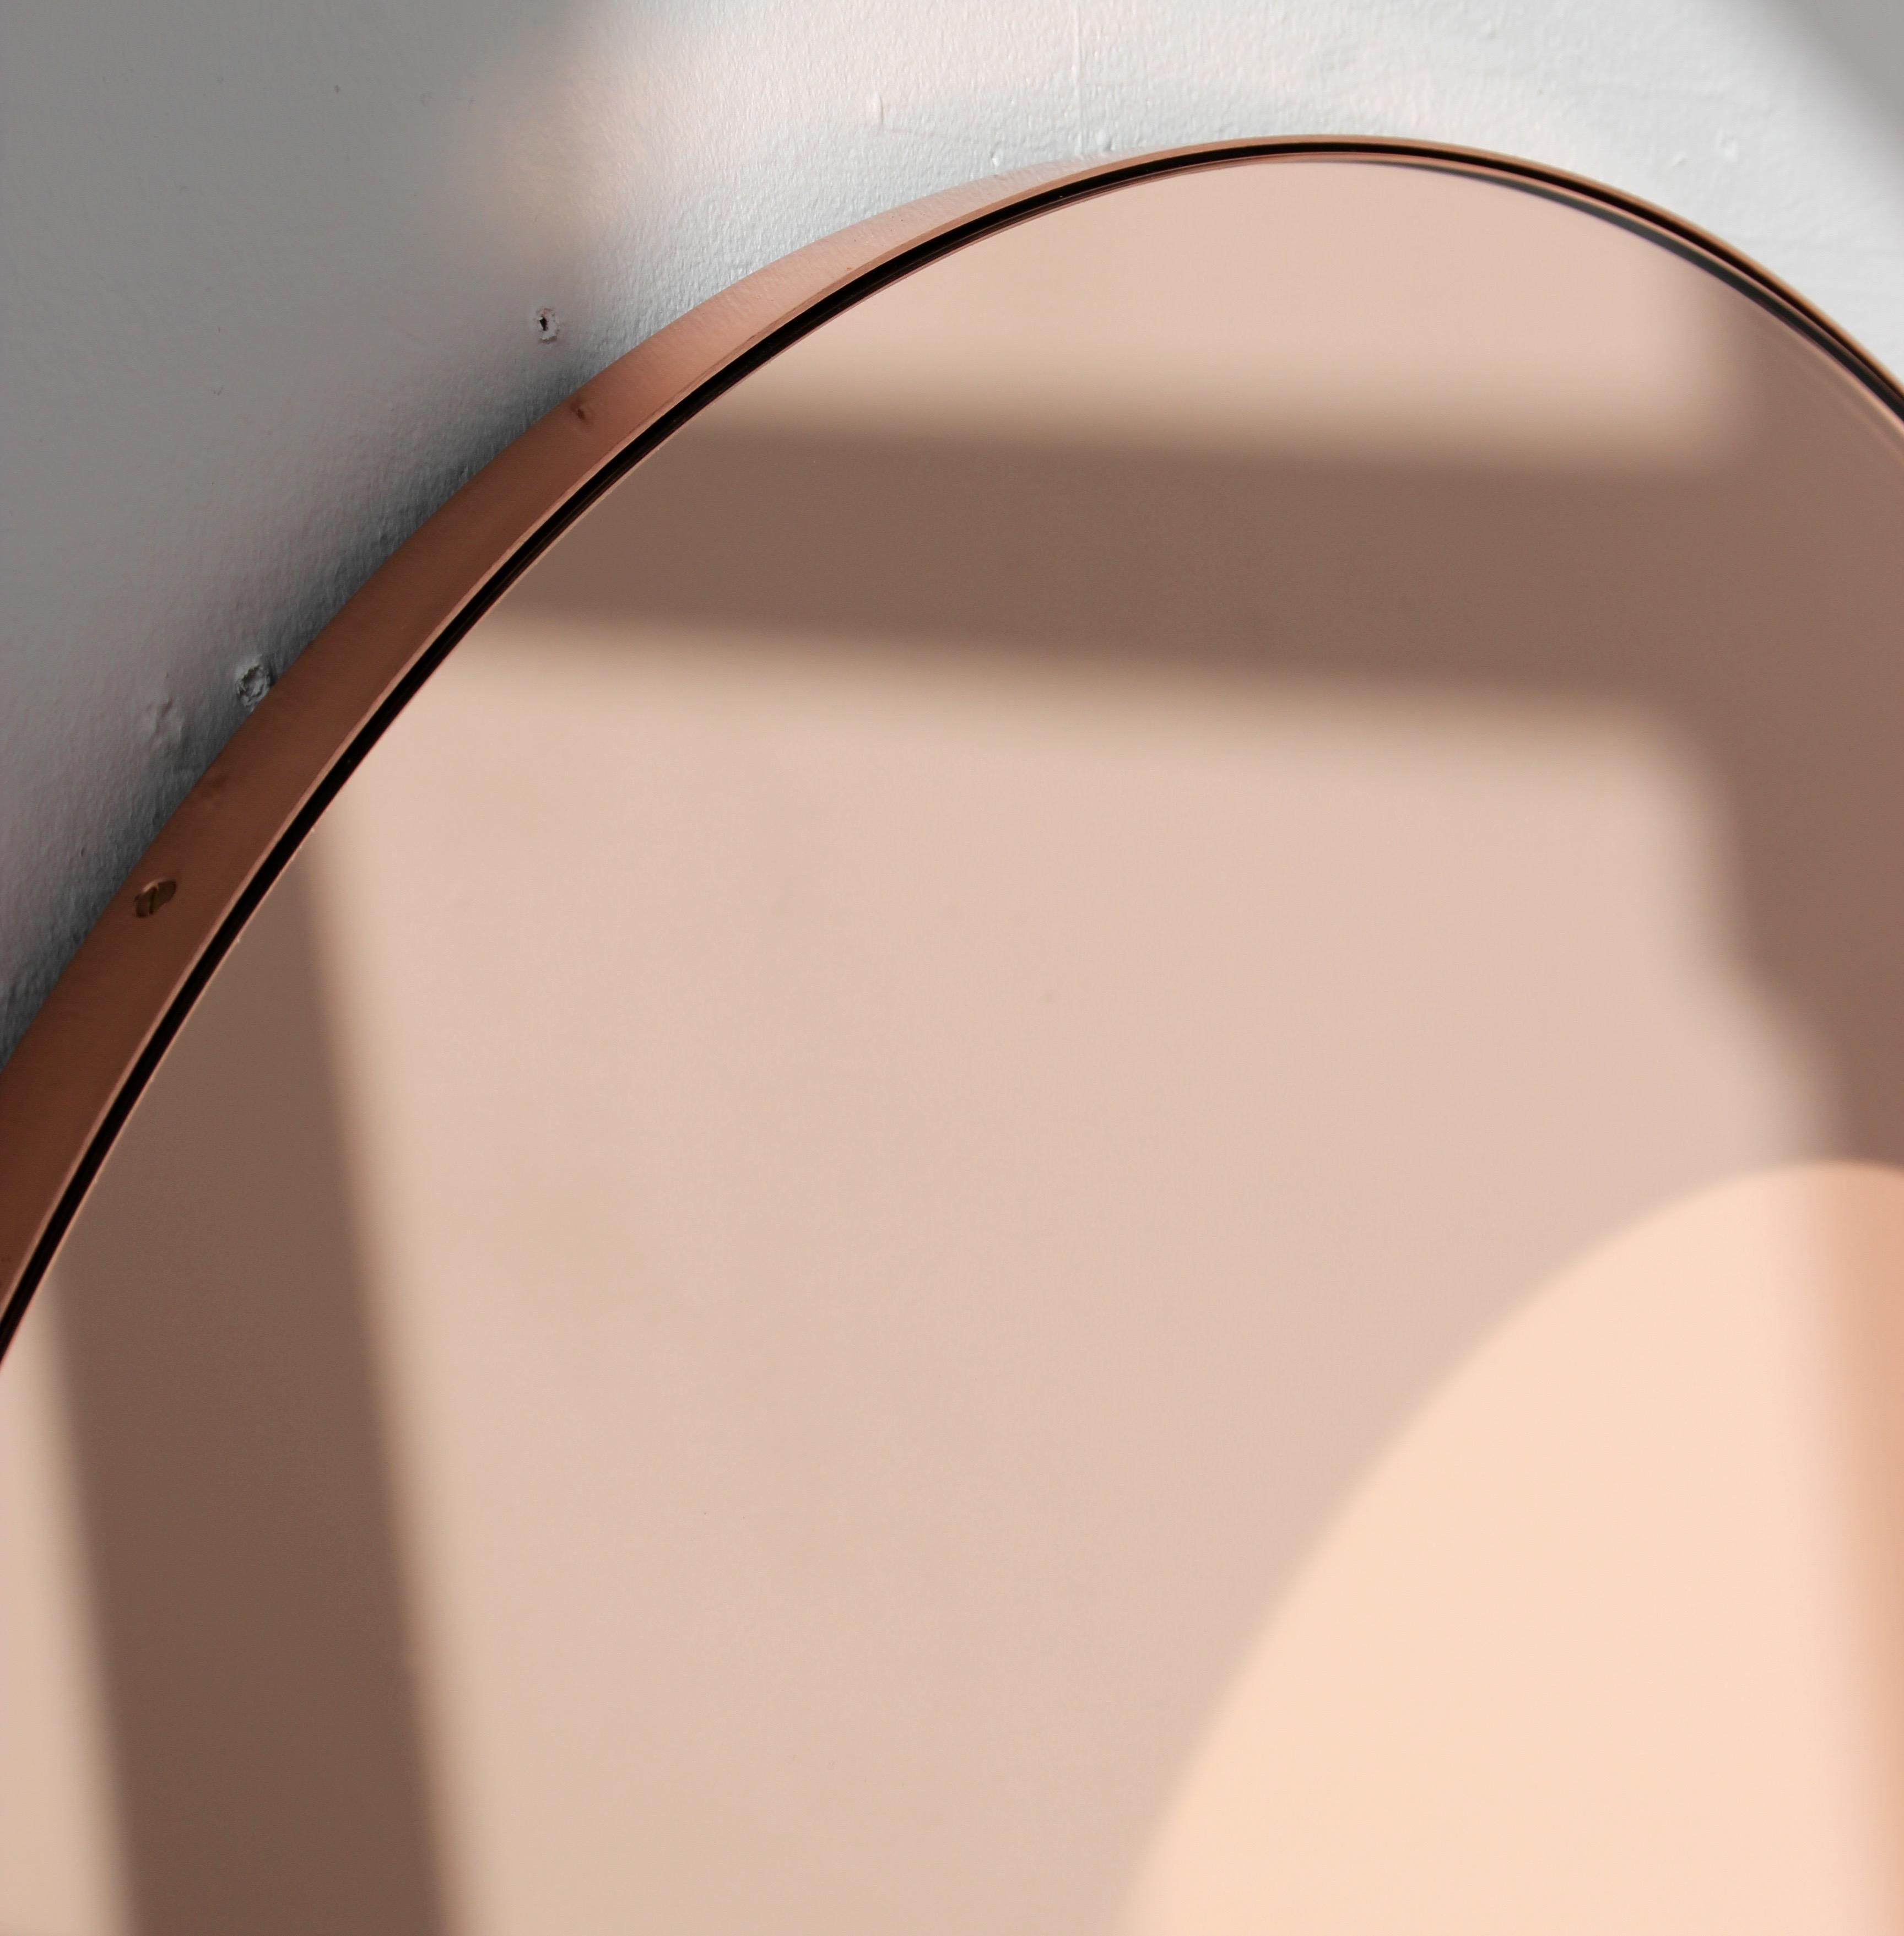 Organic Modern Orbis™ Rose Gold Tinted Round Contemporary Mirror with Copper Frame - Large